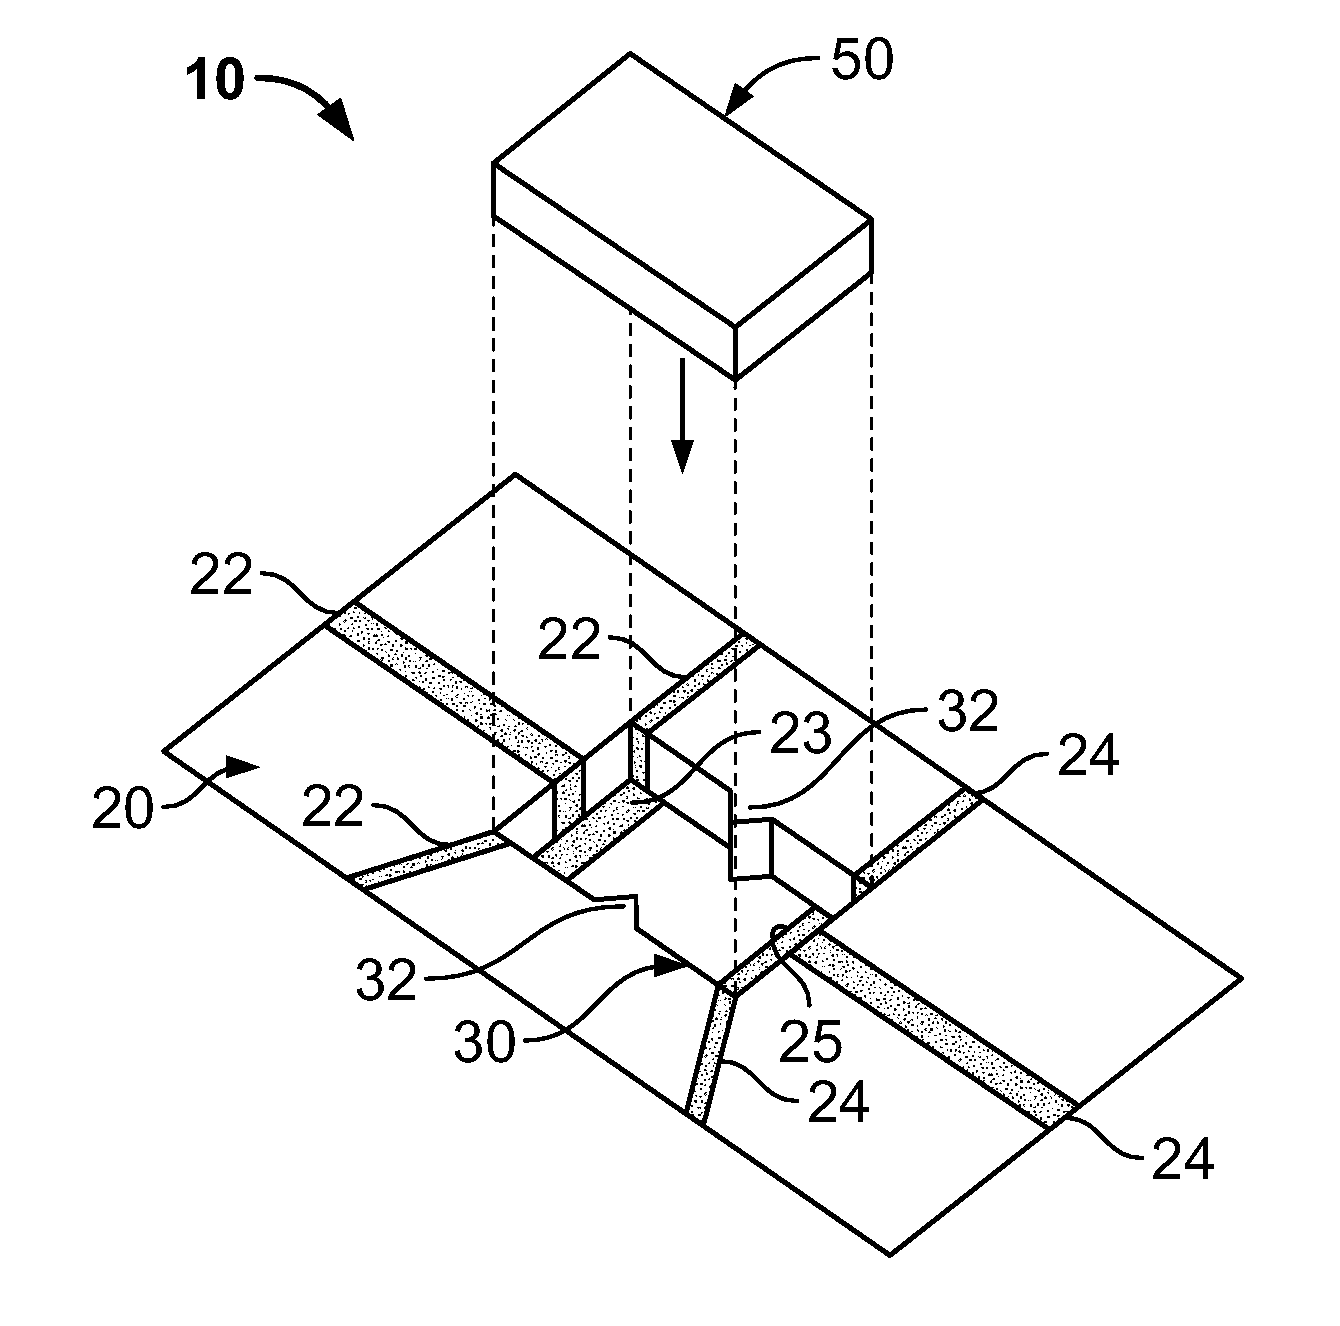 System for attaching electronic components to molded interconnection devices